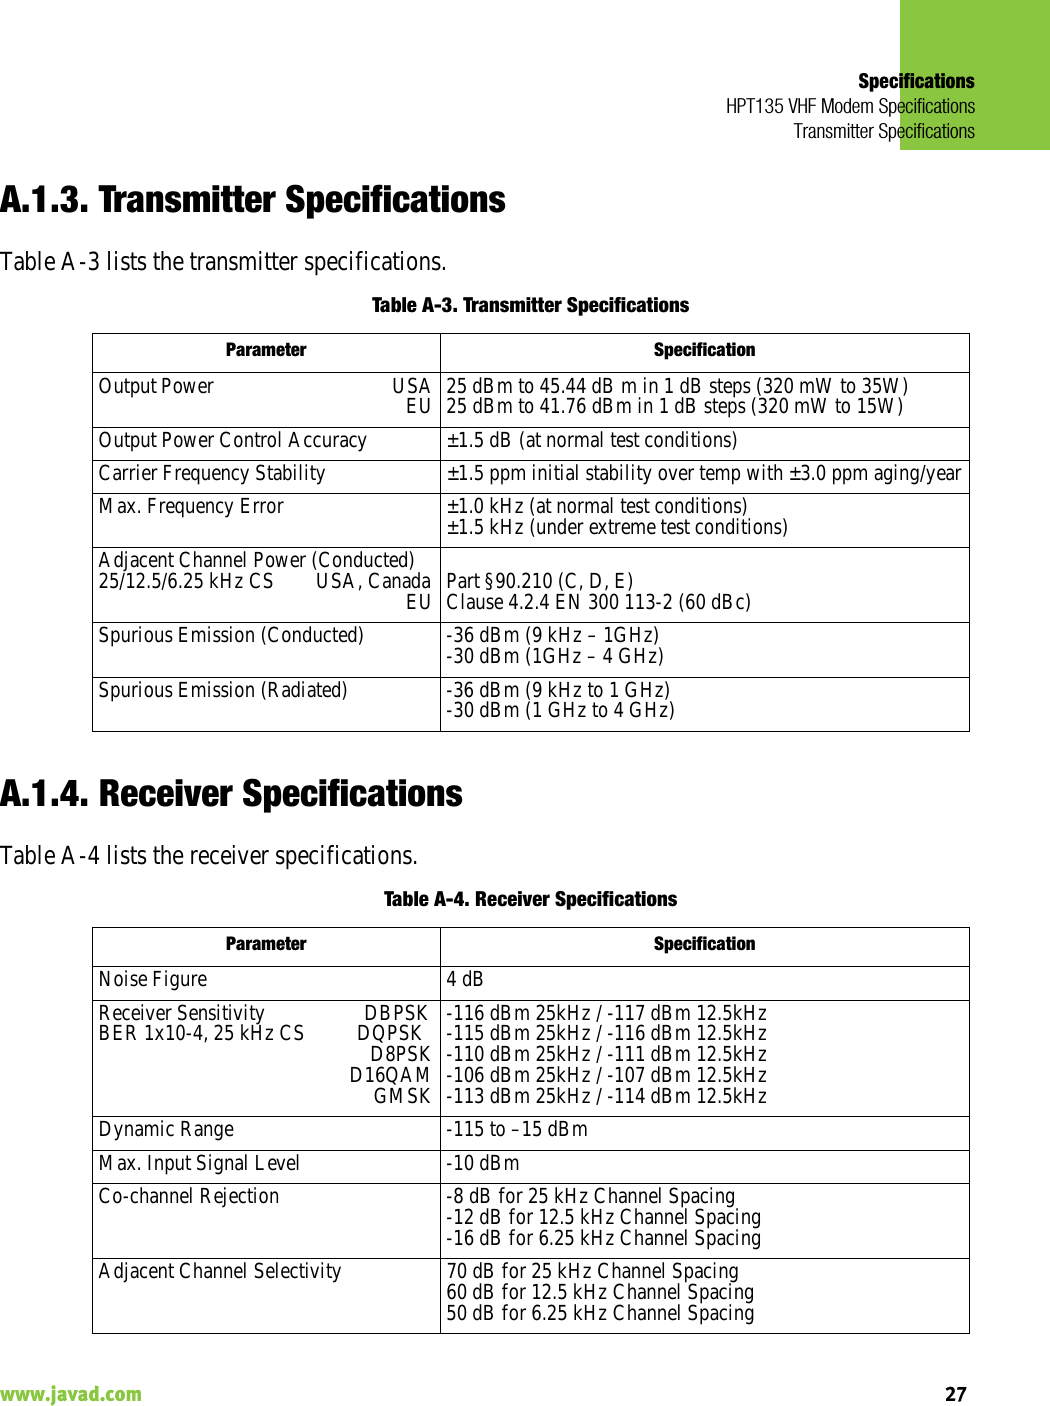 SpecificationsHPT135 VHF Modem SpecificationsTransmitter Specifications27www.javad.com                                                                                                                                                    A.1.3. Transmitter SpecificationsTable A-3 lists the transmitter specifications.Table A-3. Transmitter SpecificationsA.1.4. Receiver SpecificationsTable A-4 lists the receiver specifications.Table A-4. Receiver SpecificationsParameter SpecificationOutput Power                                     USA                                                                EU 25 dBm to 45.44 dB m in 1 dB steps (320 mW to 35W)25 dBm to 41.76 dBm in 1 dB steps (320 mW to 15W)Output Power Control Accuracy ±1.5 dB (at normal test conditions)Carrier Frequency Stability ±1.5 ppm initial stability over temp with ±3.0 ppm aging/yearMax. Frequency Error ±1.0 kHz (at normal test conditions)±1.5 kHz (under extreme test conditions)Adjacent Channel Power (Conducted)25/12.5/6.25 kHz CS        USA, Canada                                                                 EU Part §90.210 (C, D, E)Clause 4.2.4 EN 300 113-2 (60 dBc)Spurious Emission (Conducted) -36 dBm (9 kHz – 1GHz) -30 dBm (1GHz – 4 GHz)Spurious Emission (Radiated) -36 dBm (9 kHz to 1 GHz)-30 dBm (1 GHz to 4 GHz)Parameter SpecificationNoise Figure 4 dBReceiver Sensitivity                   DBPSKBER 1x10-4, 25 kHz CS          DQPSK                                               D8PSKD16QAMGMSK-116 dBm 25kHz / -117 dBm 12.5kHz-115 dBm 25kHz / -116 dBm 12.5kHz-110 dBm 25kHz / -111 dBm 12.5kHz-106 dBm 25kHz / -107 dBm 12.5kHz-113 dBm 25kHz / -114 dBm 12.5kHzDynamic Range -115 to –15 dBmMax. Input Signal Level -10 dBmCo-channel Rejection -8 dB for 25 kHz Channel Spacing-12 dB for 12.5 kHz Channel Spacing-16 dB for 6.25 kHz Channel SpacingAdjacent Channel Selectivity 70 dB for 25 kHz Channel Spacing60 dB for 12.5 kHz Channel Spacing50 dB for 6.25 kHz Channel Spacing